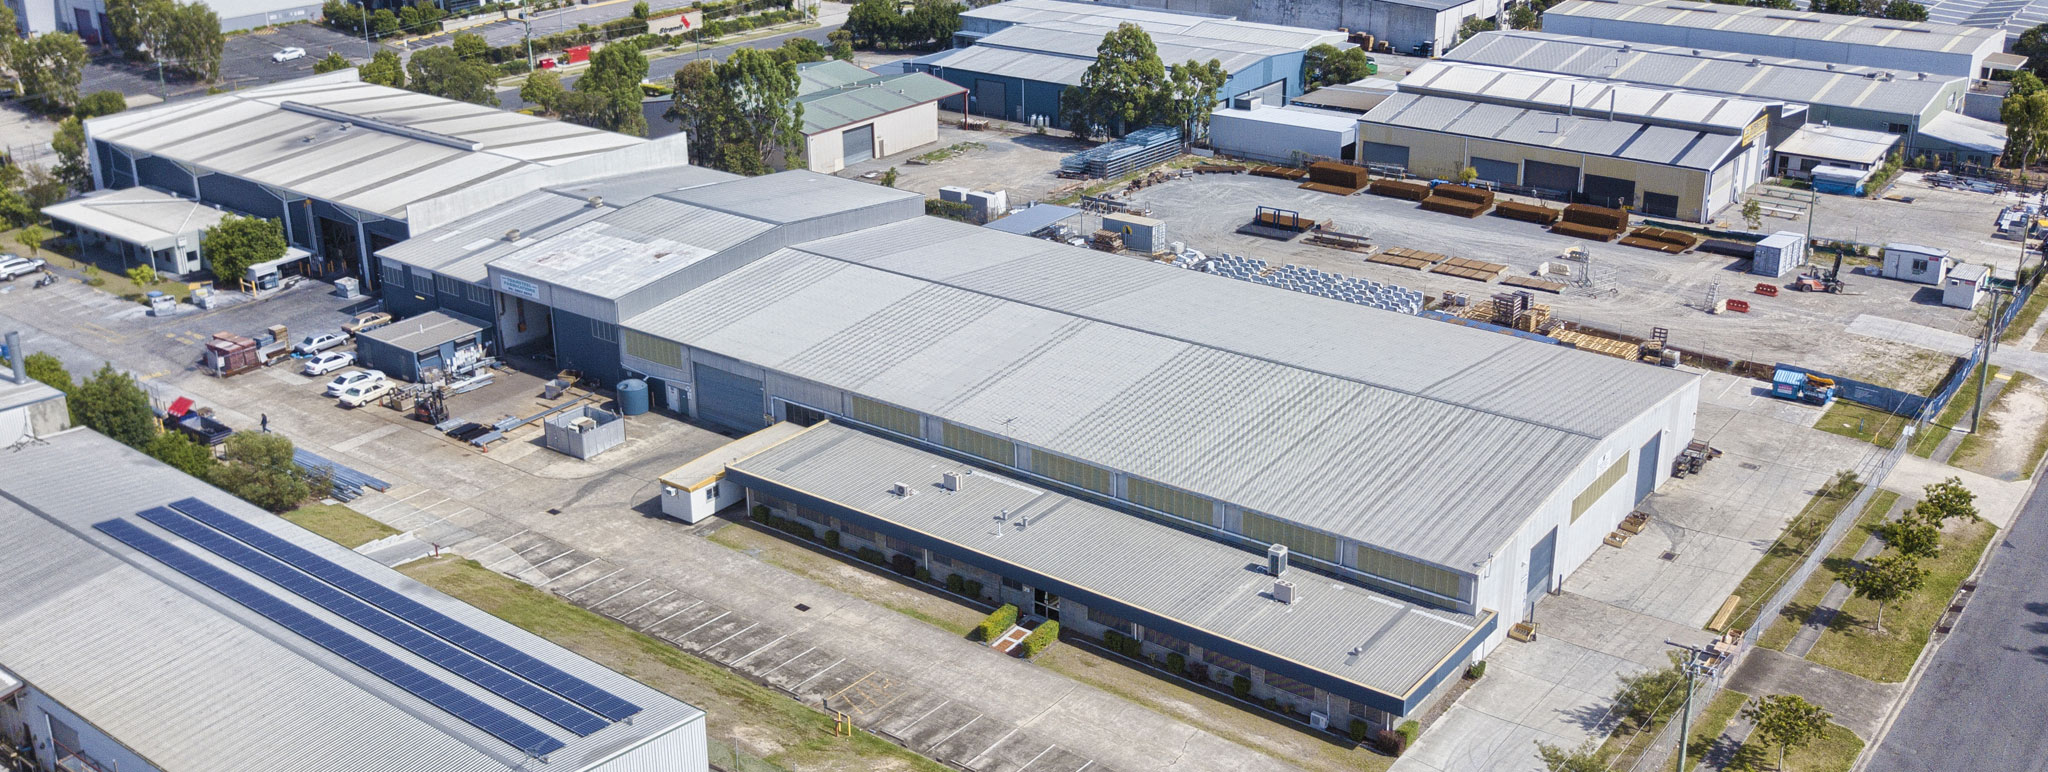 Drones for large format building sales and leasing